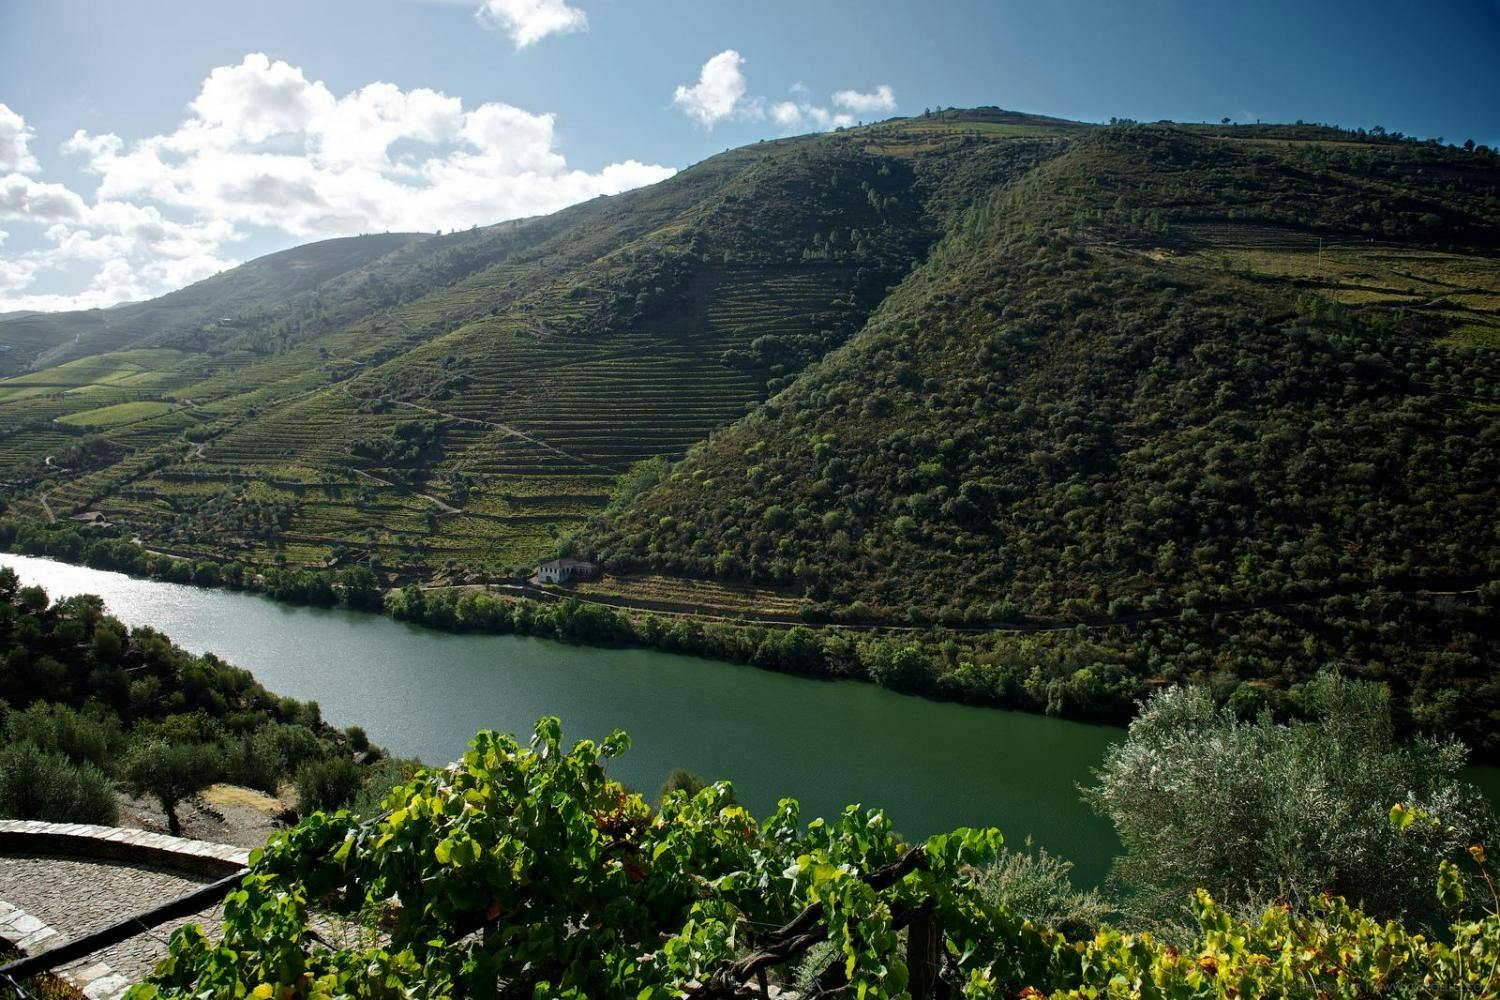 Guided tour of the Douro with river cruise and wine estates' visit Musement